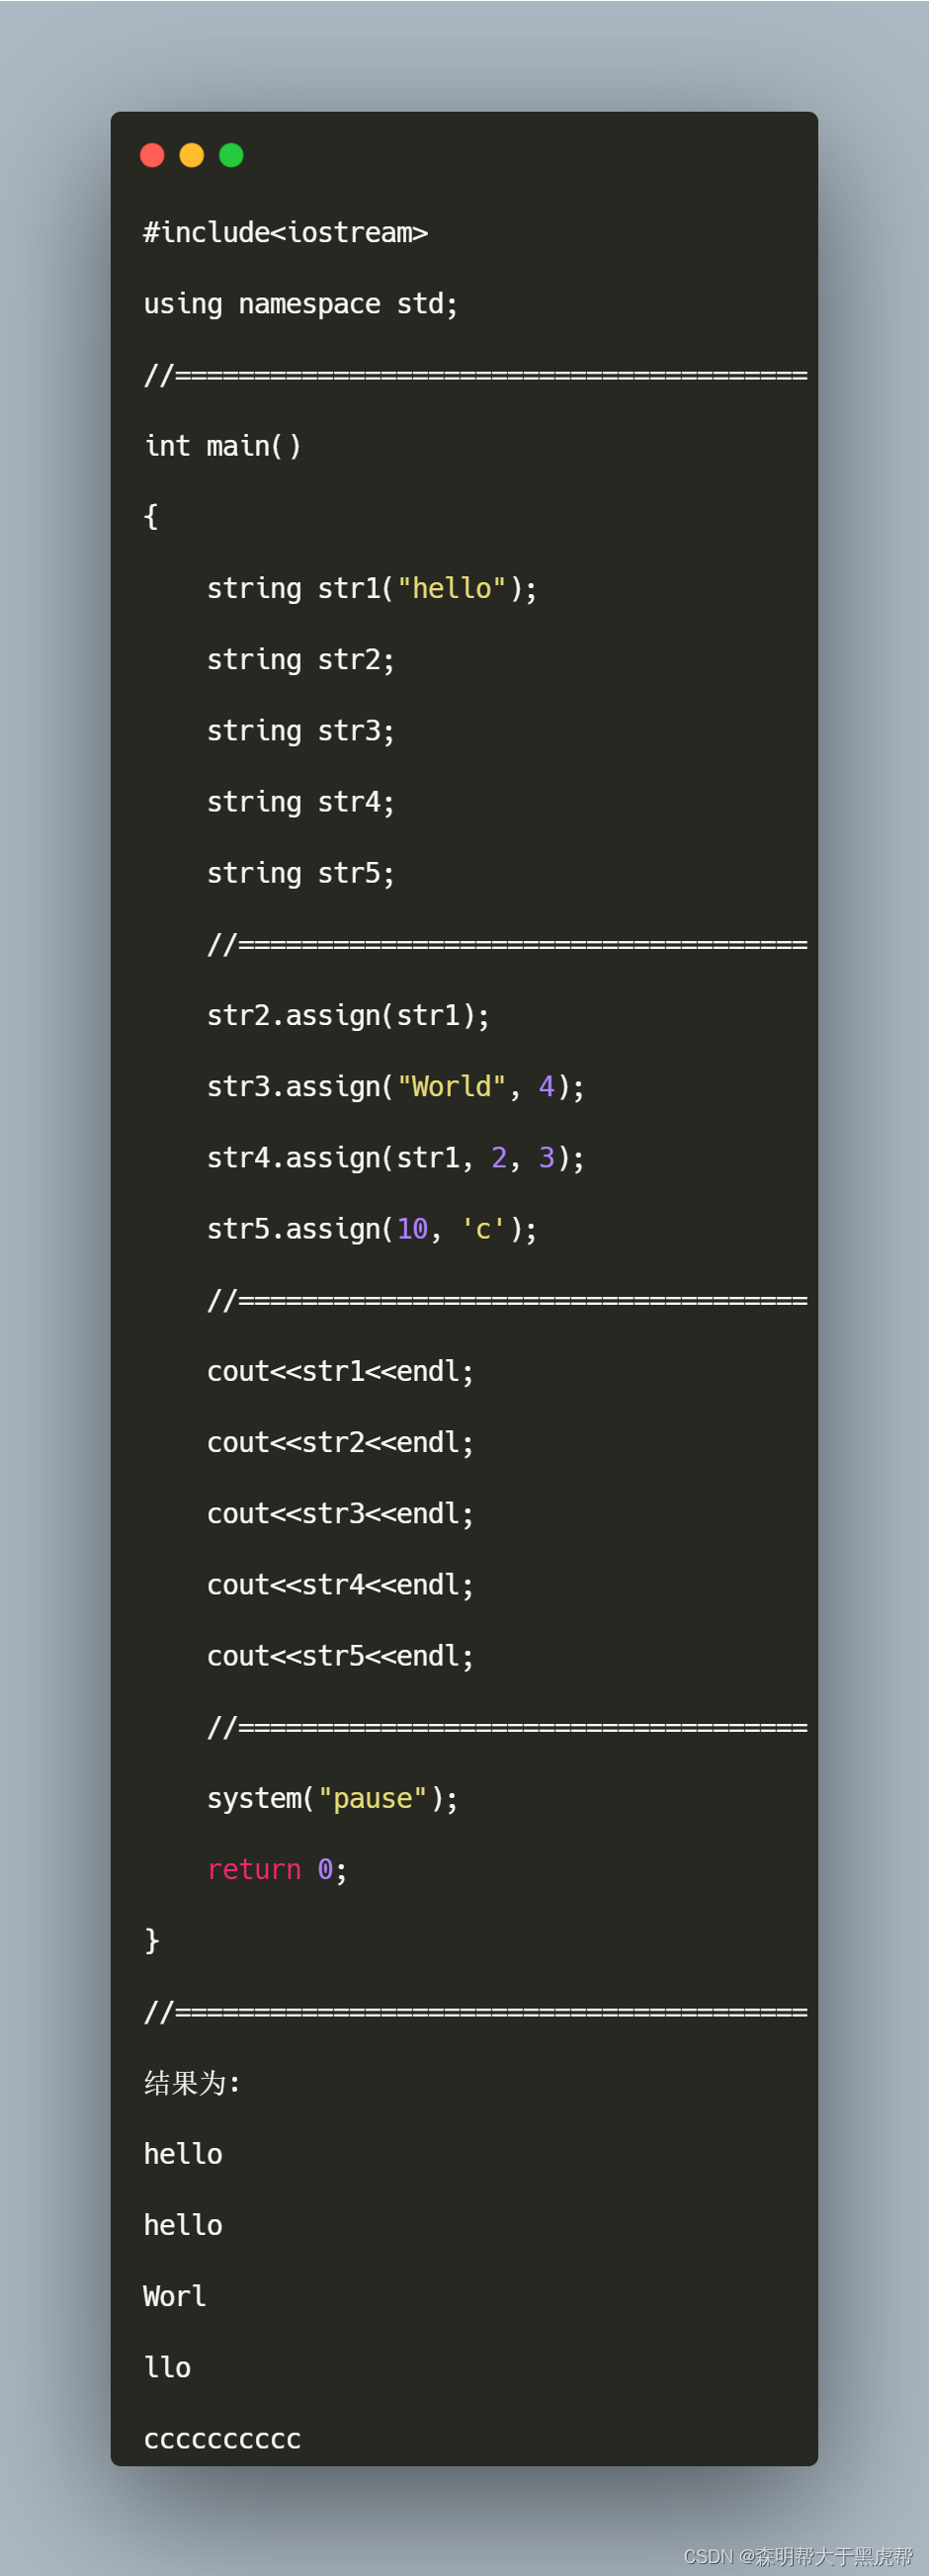 string::size_type、string::npos、 string::substr、string::find_first_of、string::replace、string::assign